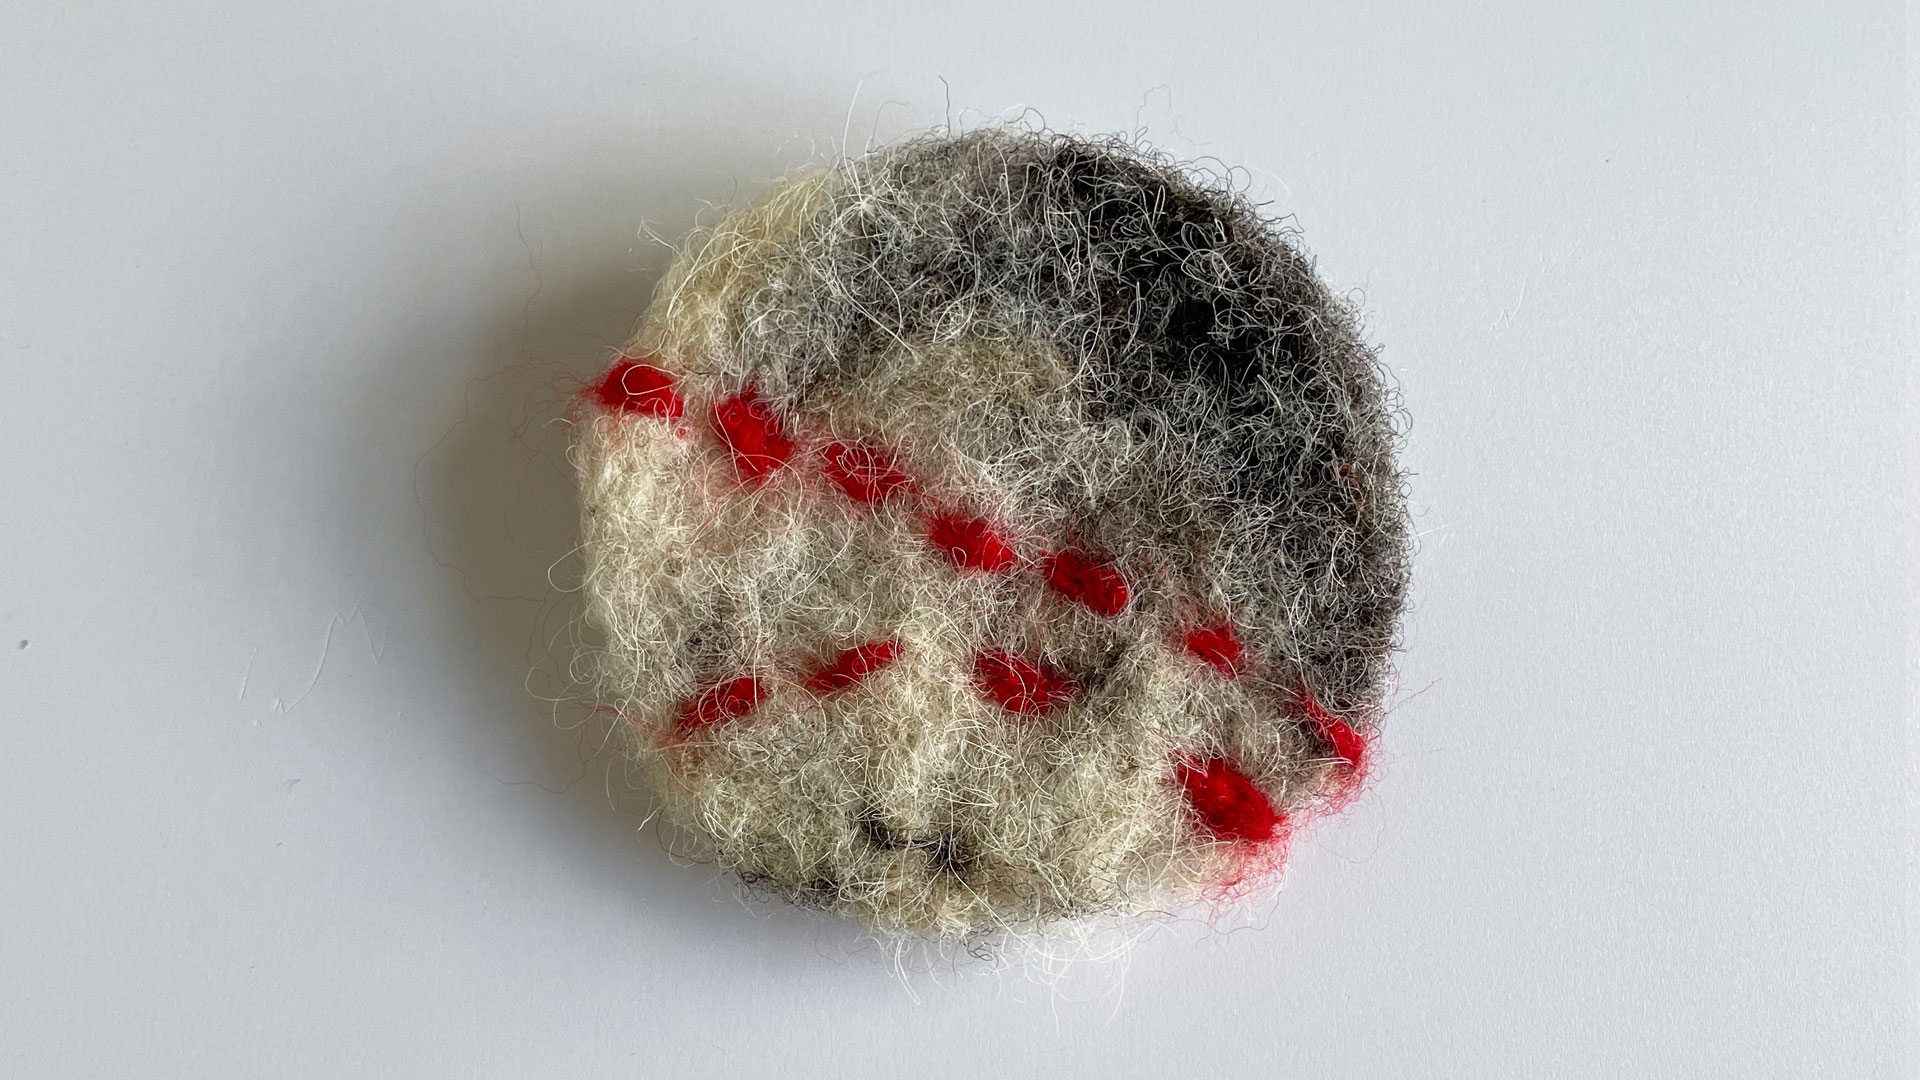 A circular brooch made of a mixture of brown and natural coloured wool with two red stripes, on a white background